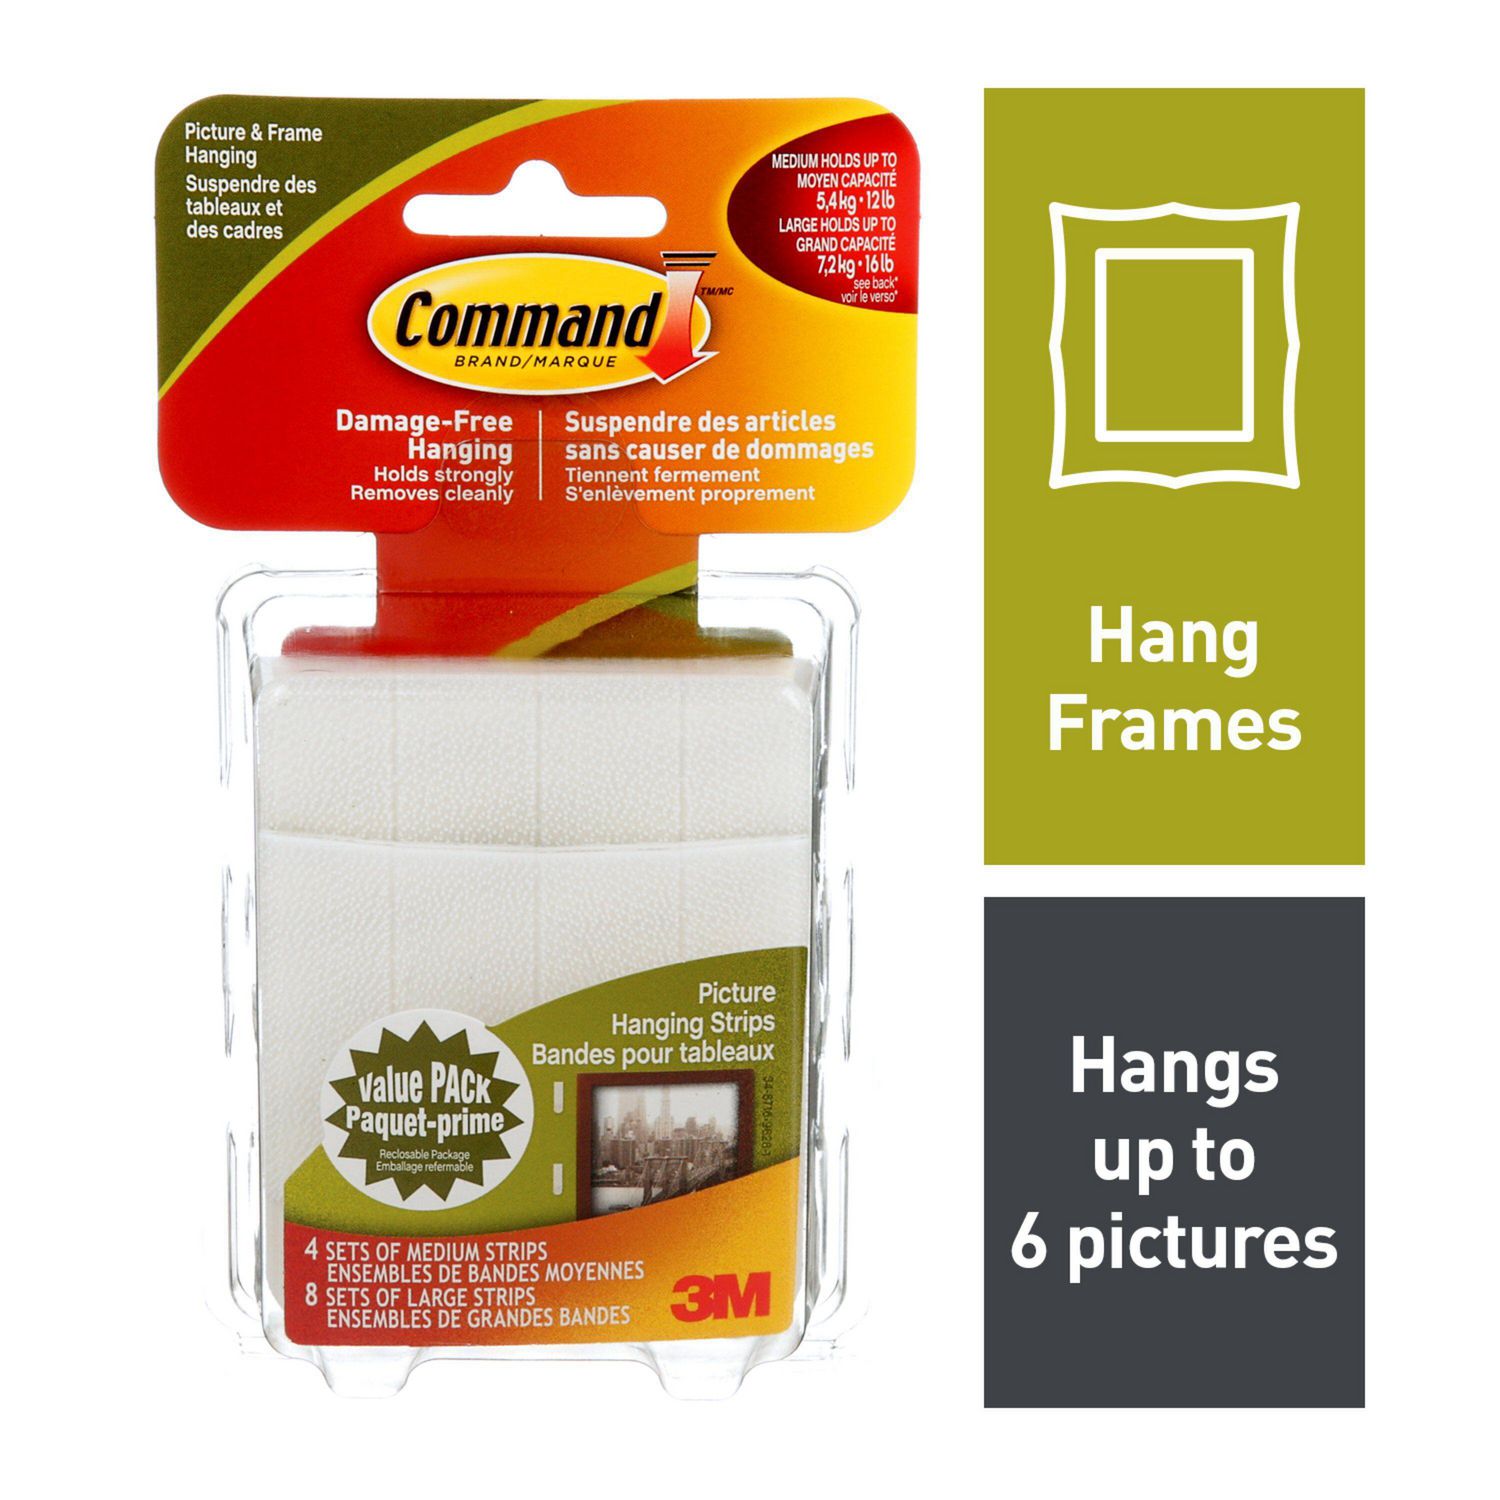 3pks 3M Command Brand Damage Free Hanging 16lbs LARGE PICTURE HANGING STRIPS 